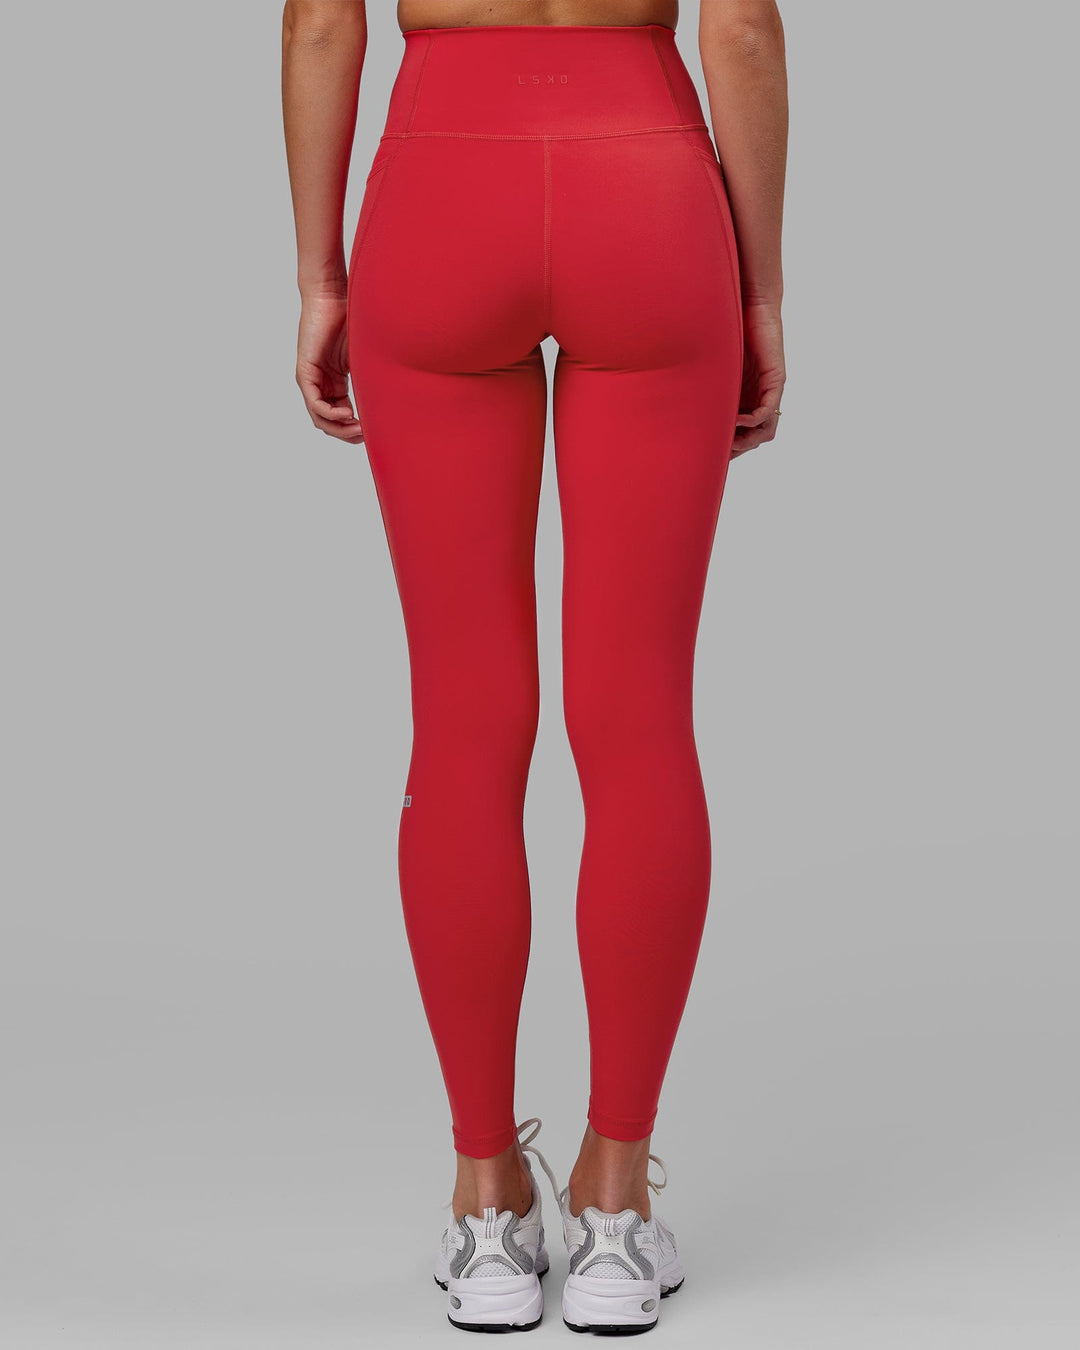 Fusion Full Length Tights - Scarlet